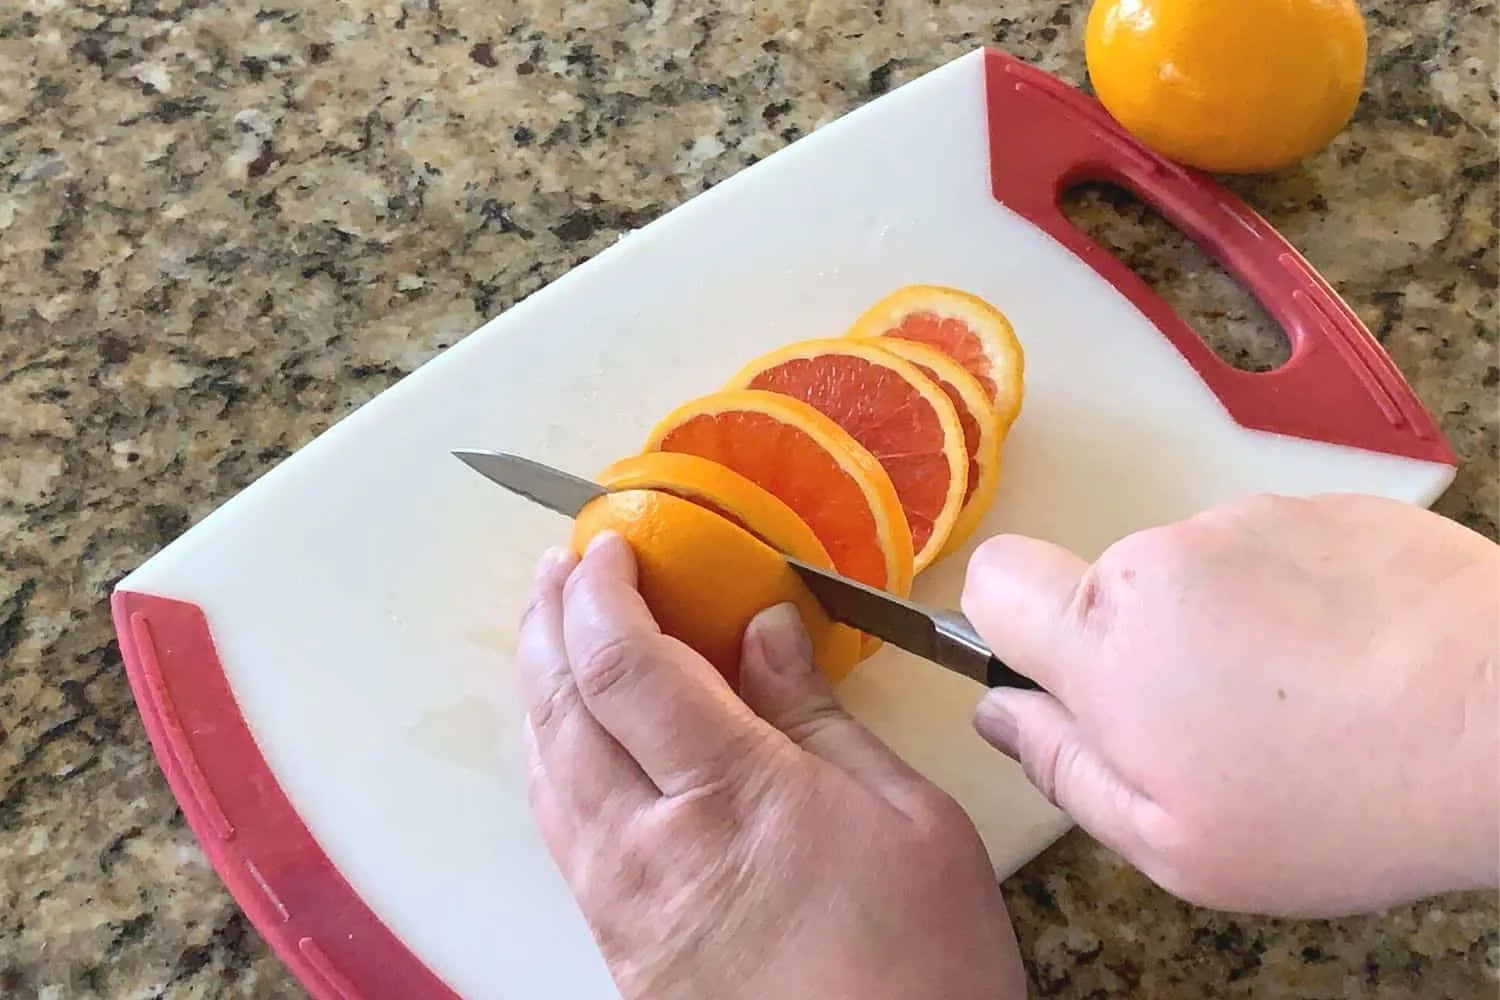 Slicing oranges to be dried